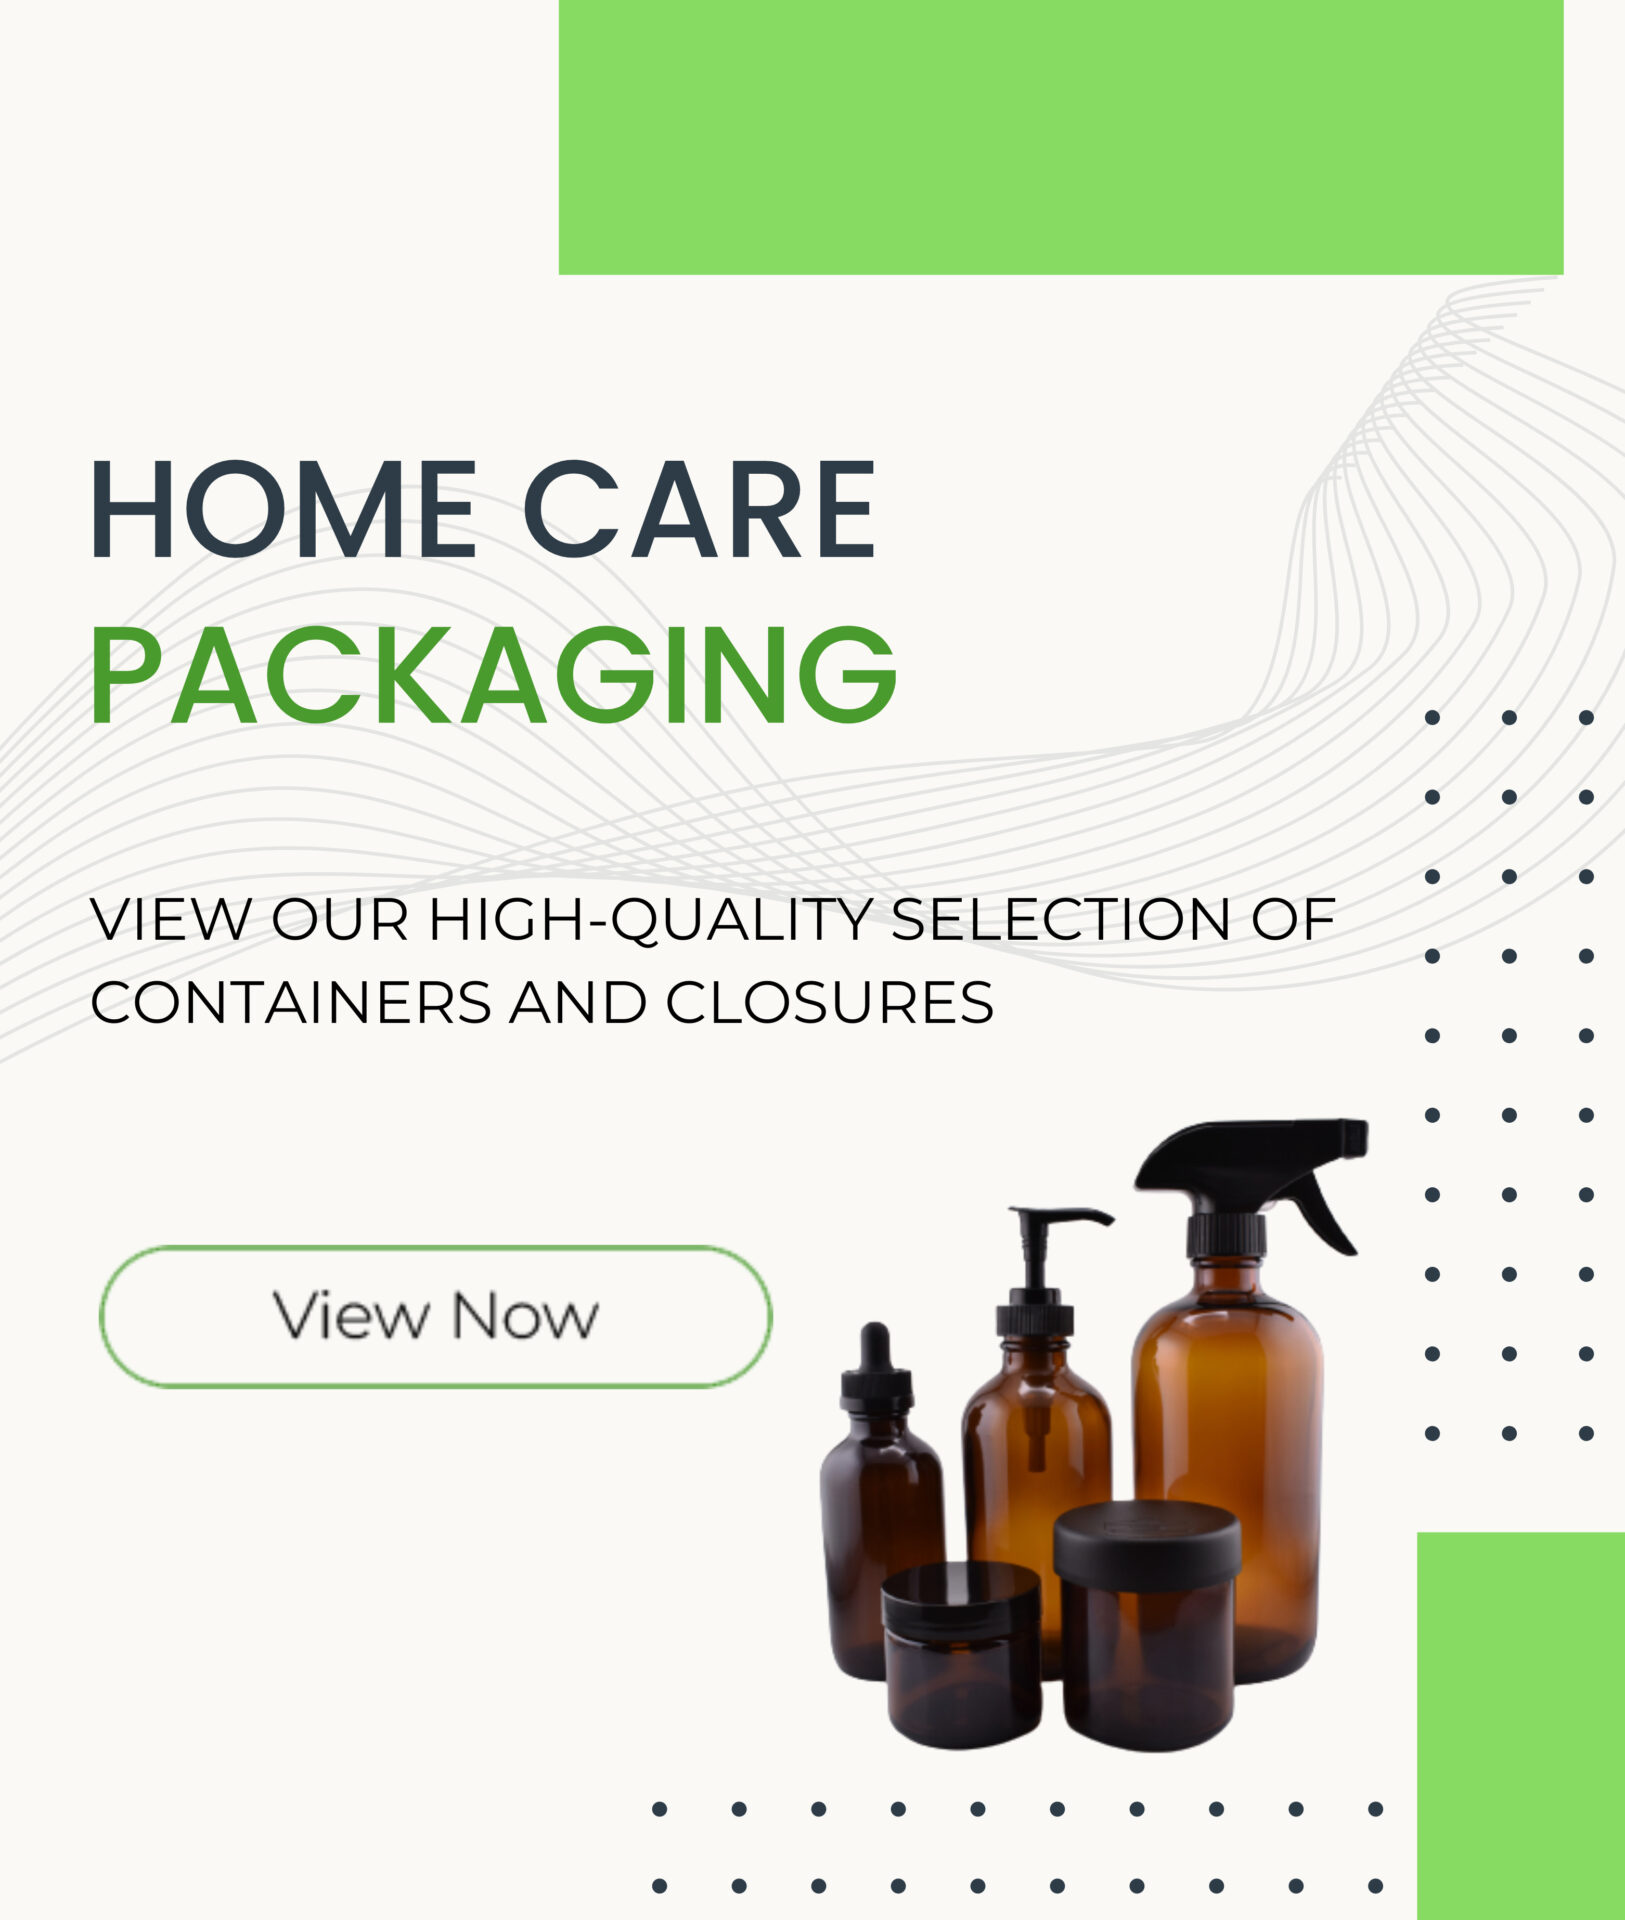 Resized Home Care Banner (3124 × 3692px)